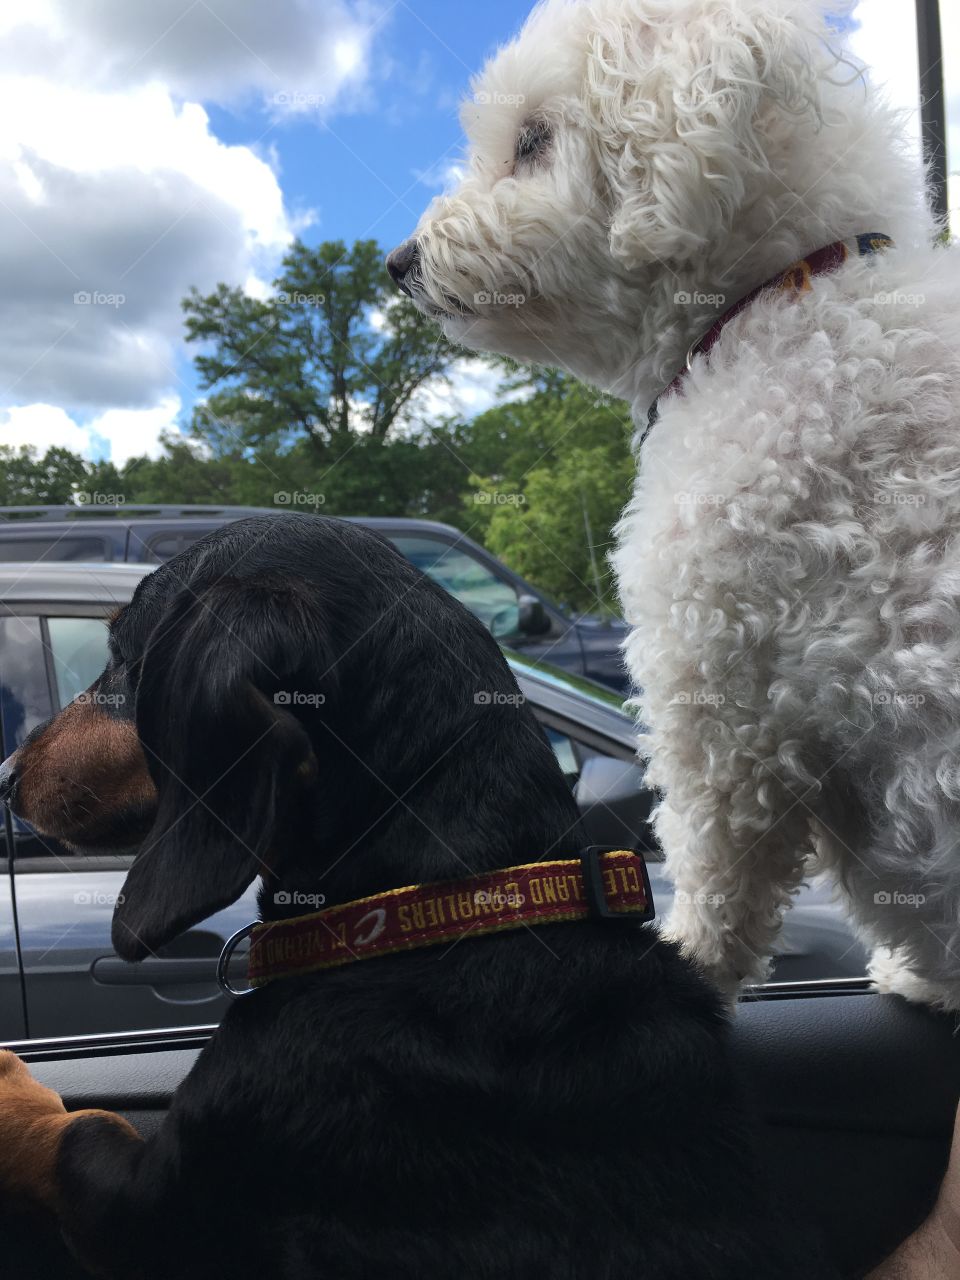 Dachshund and Bichon looking out of window 